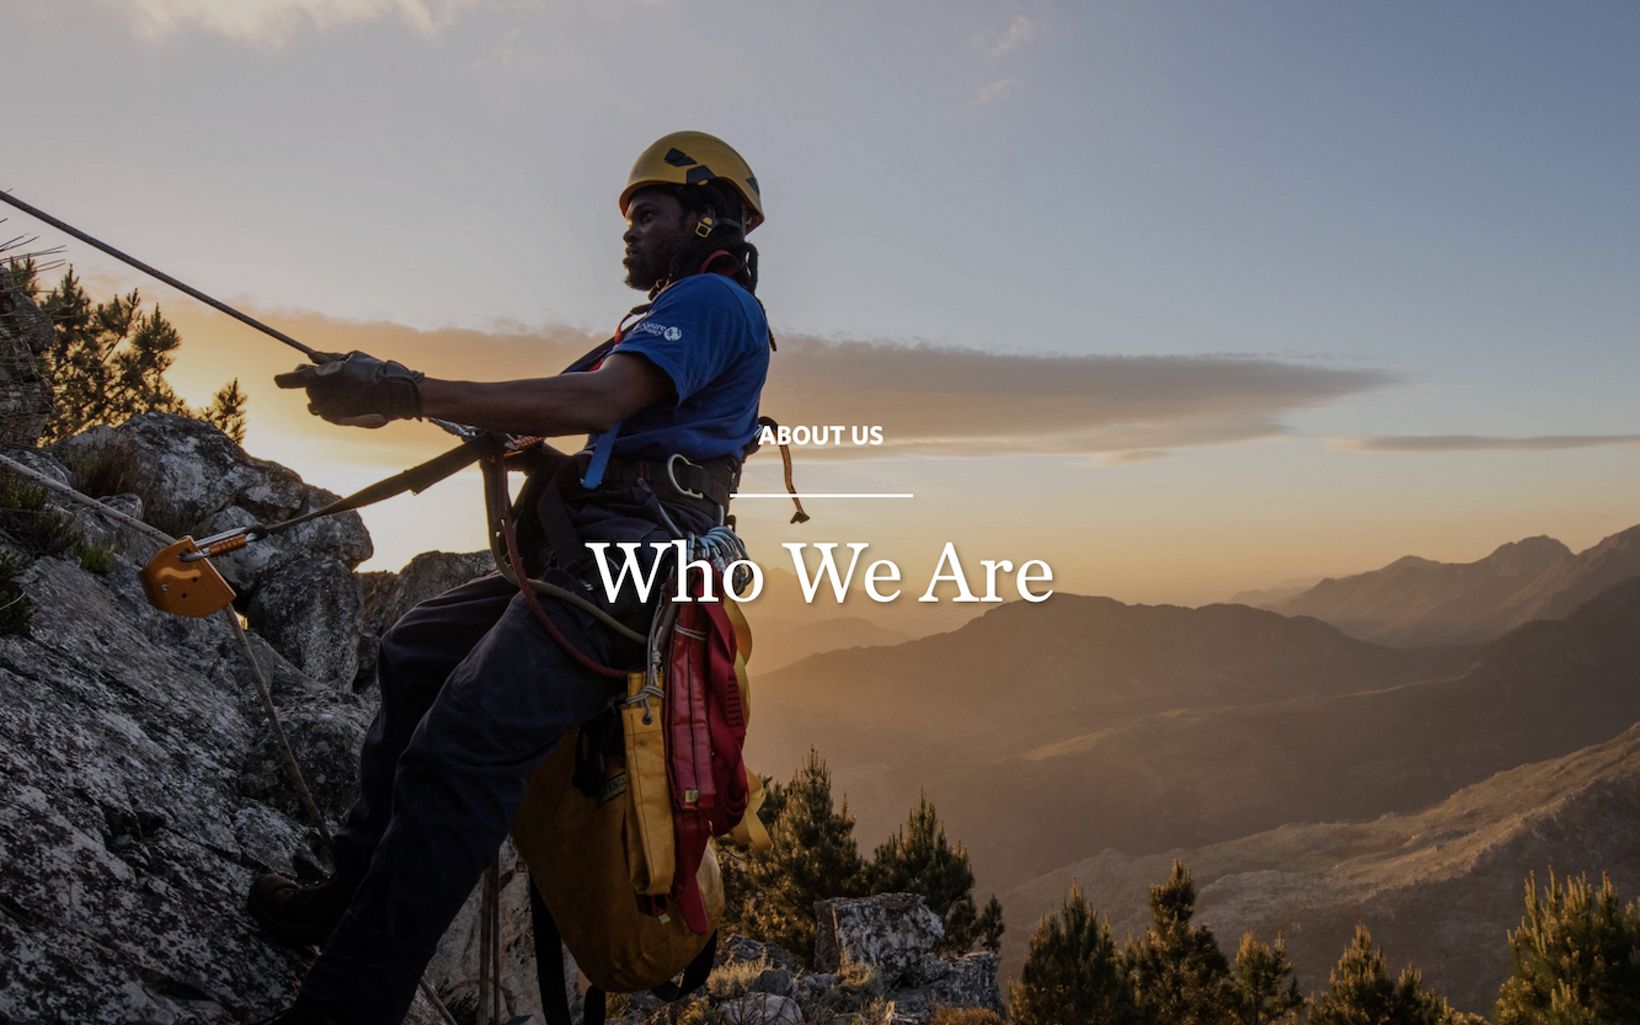 Sunset photo of rock climber and navigational text overlay: 'About Us, Who We Are'.